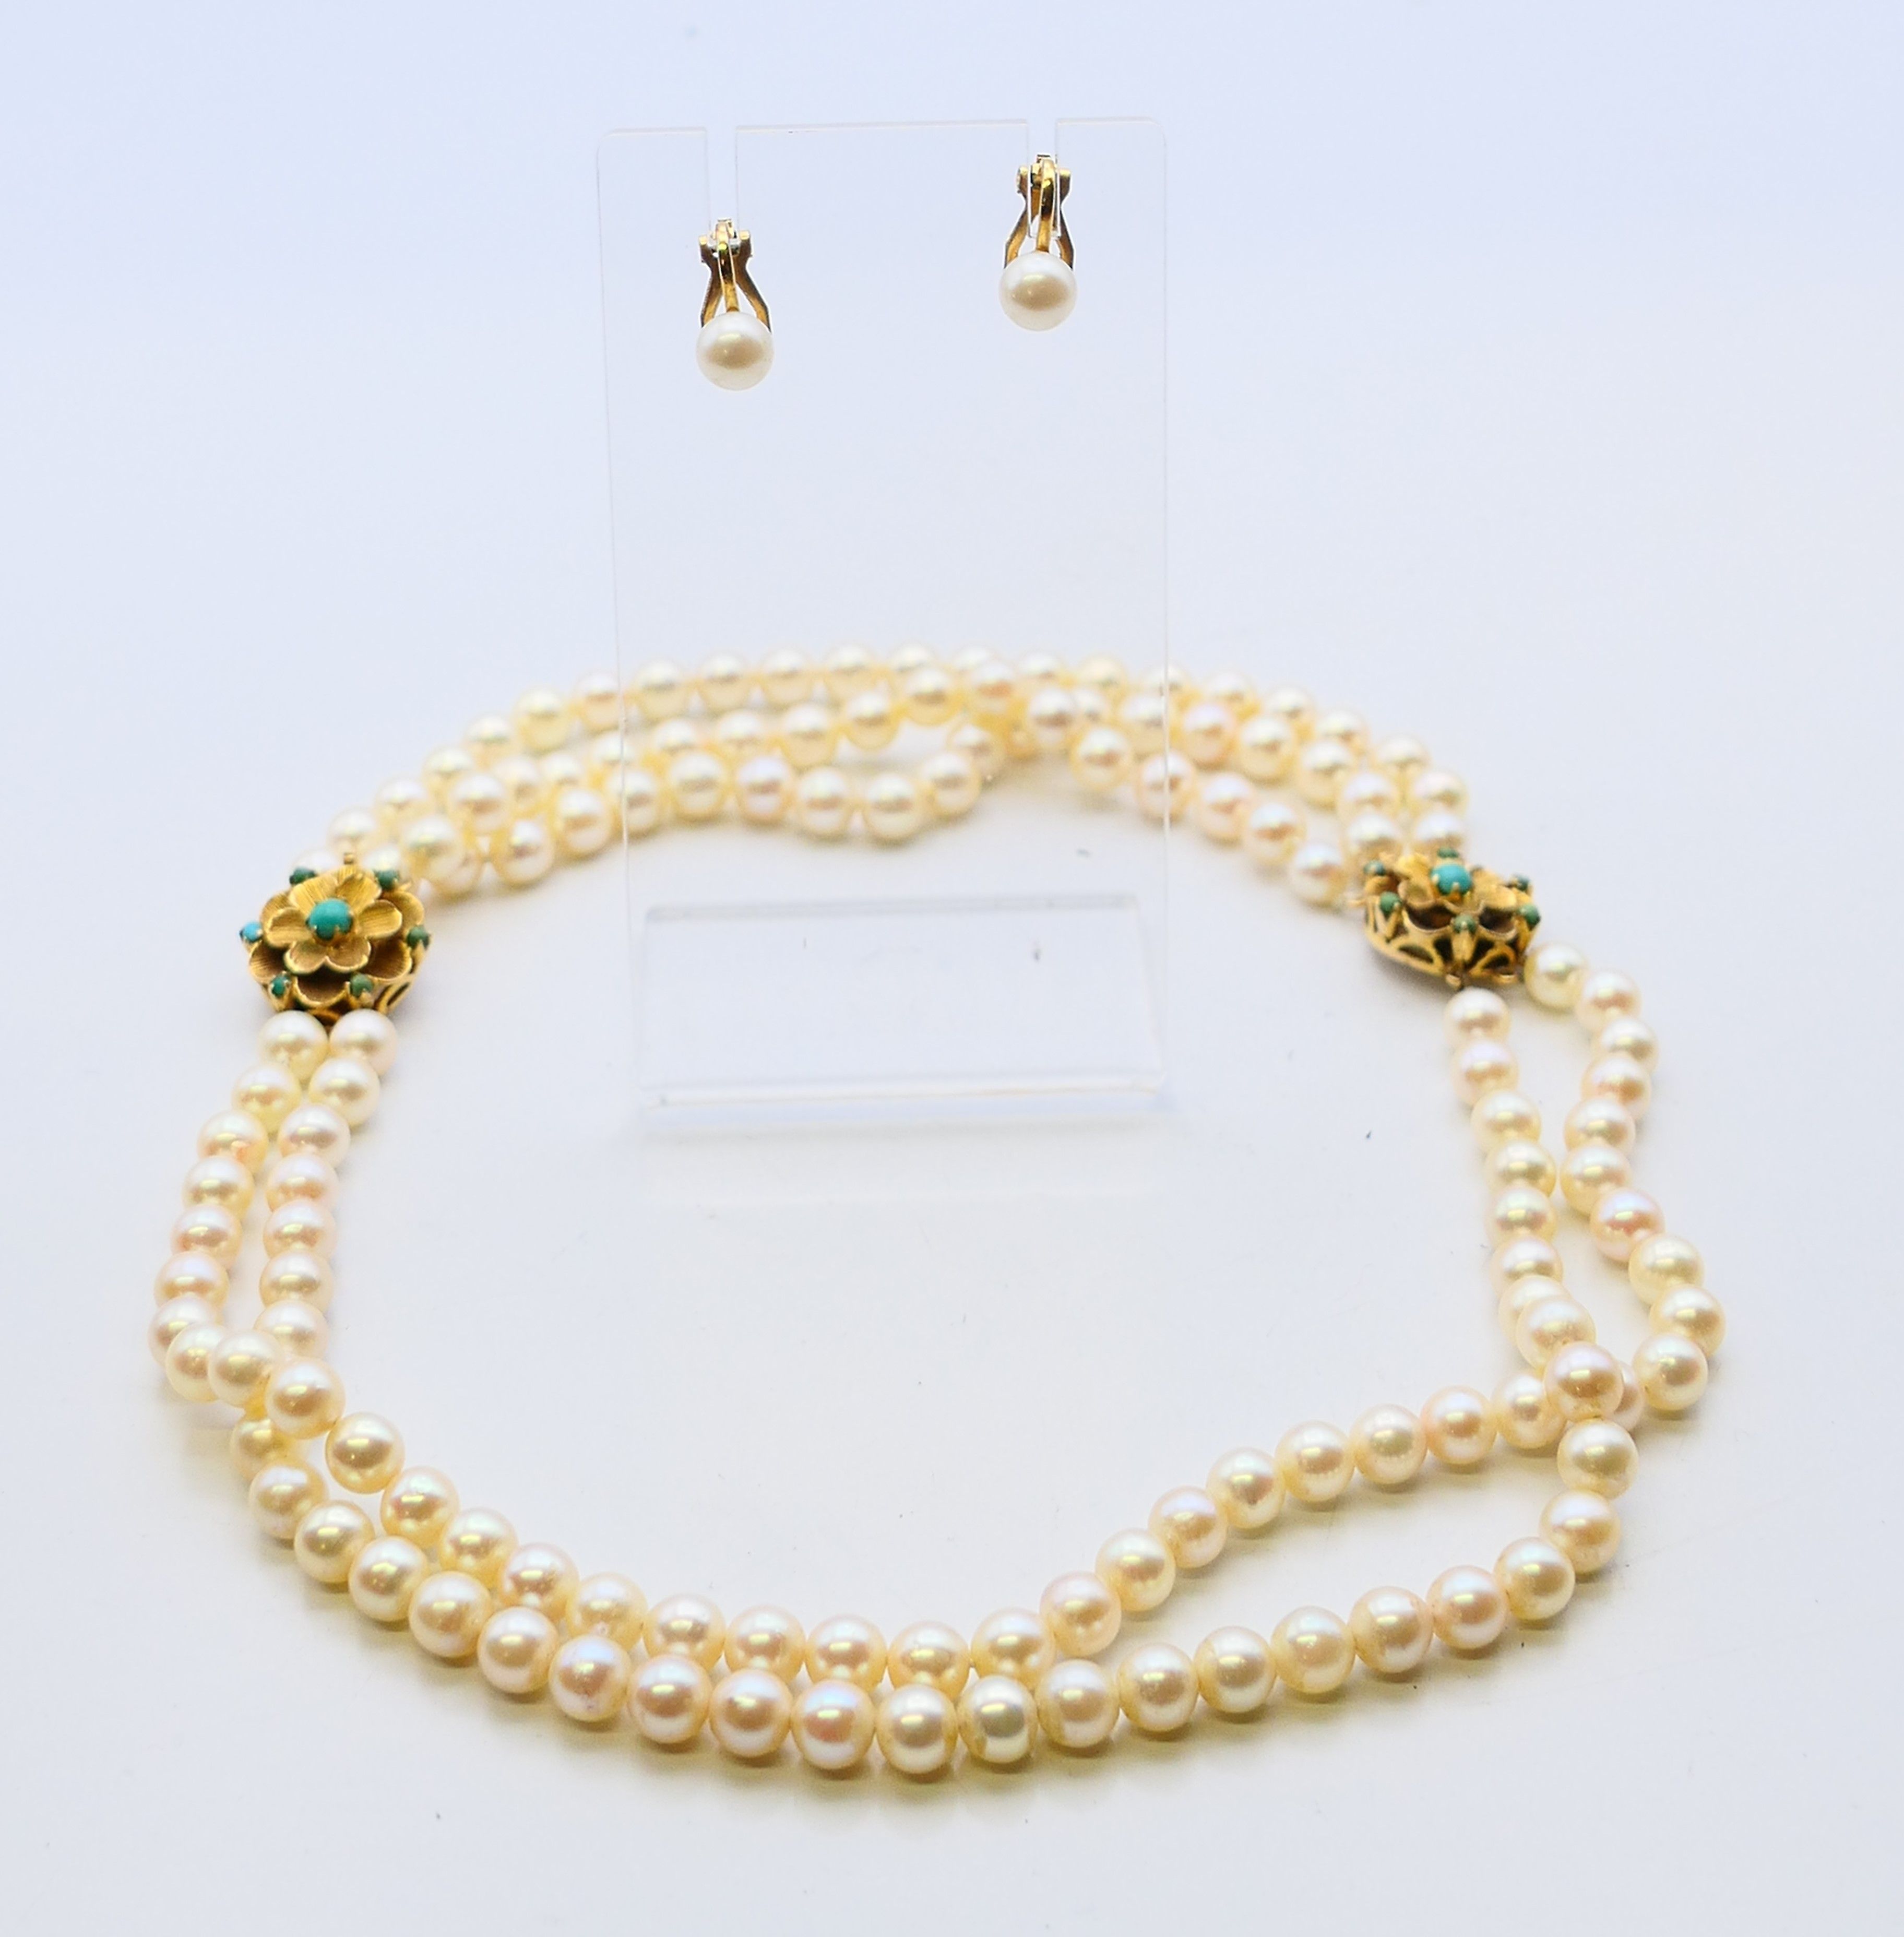 A 9 ct gold clasp pearl necklace and a pair of gold pearl earrings. Necklace 44 cm long.